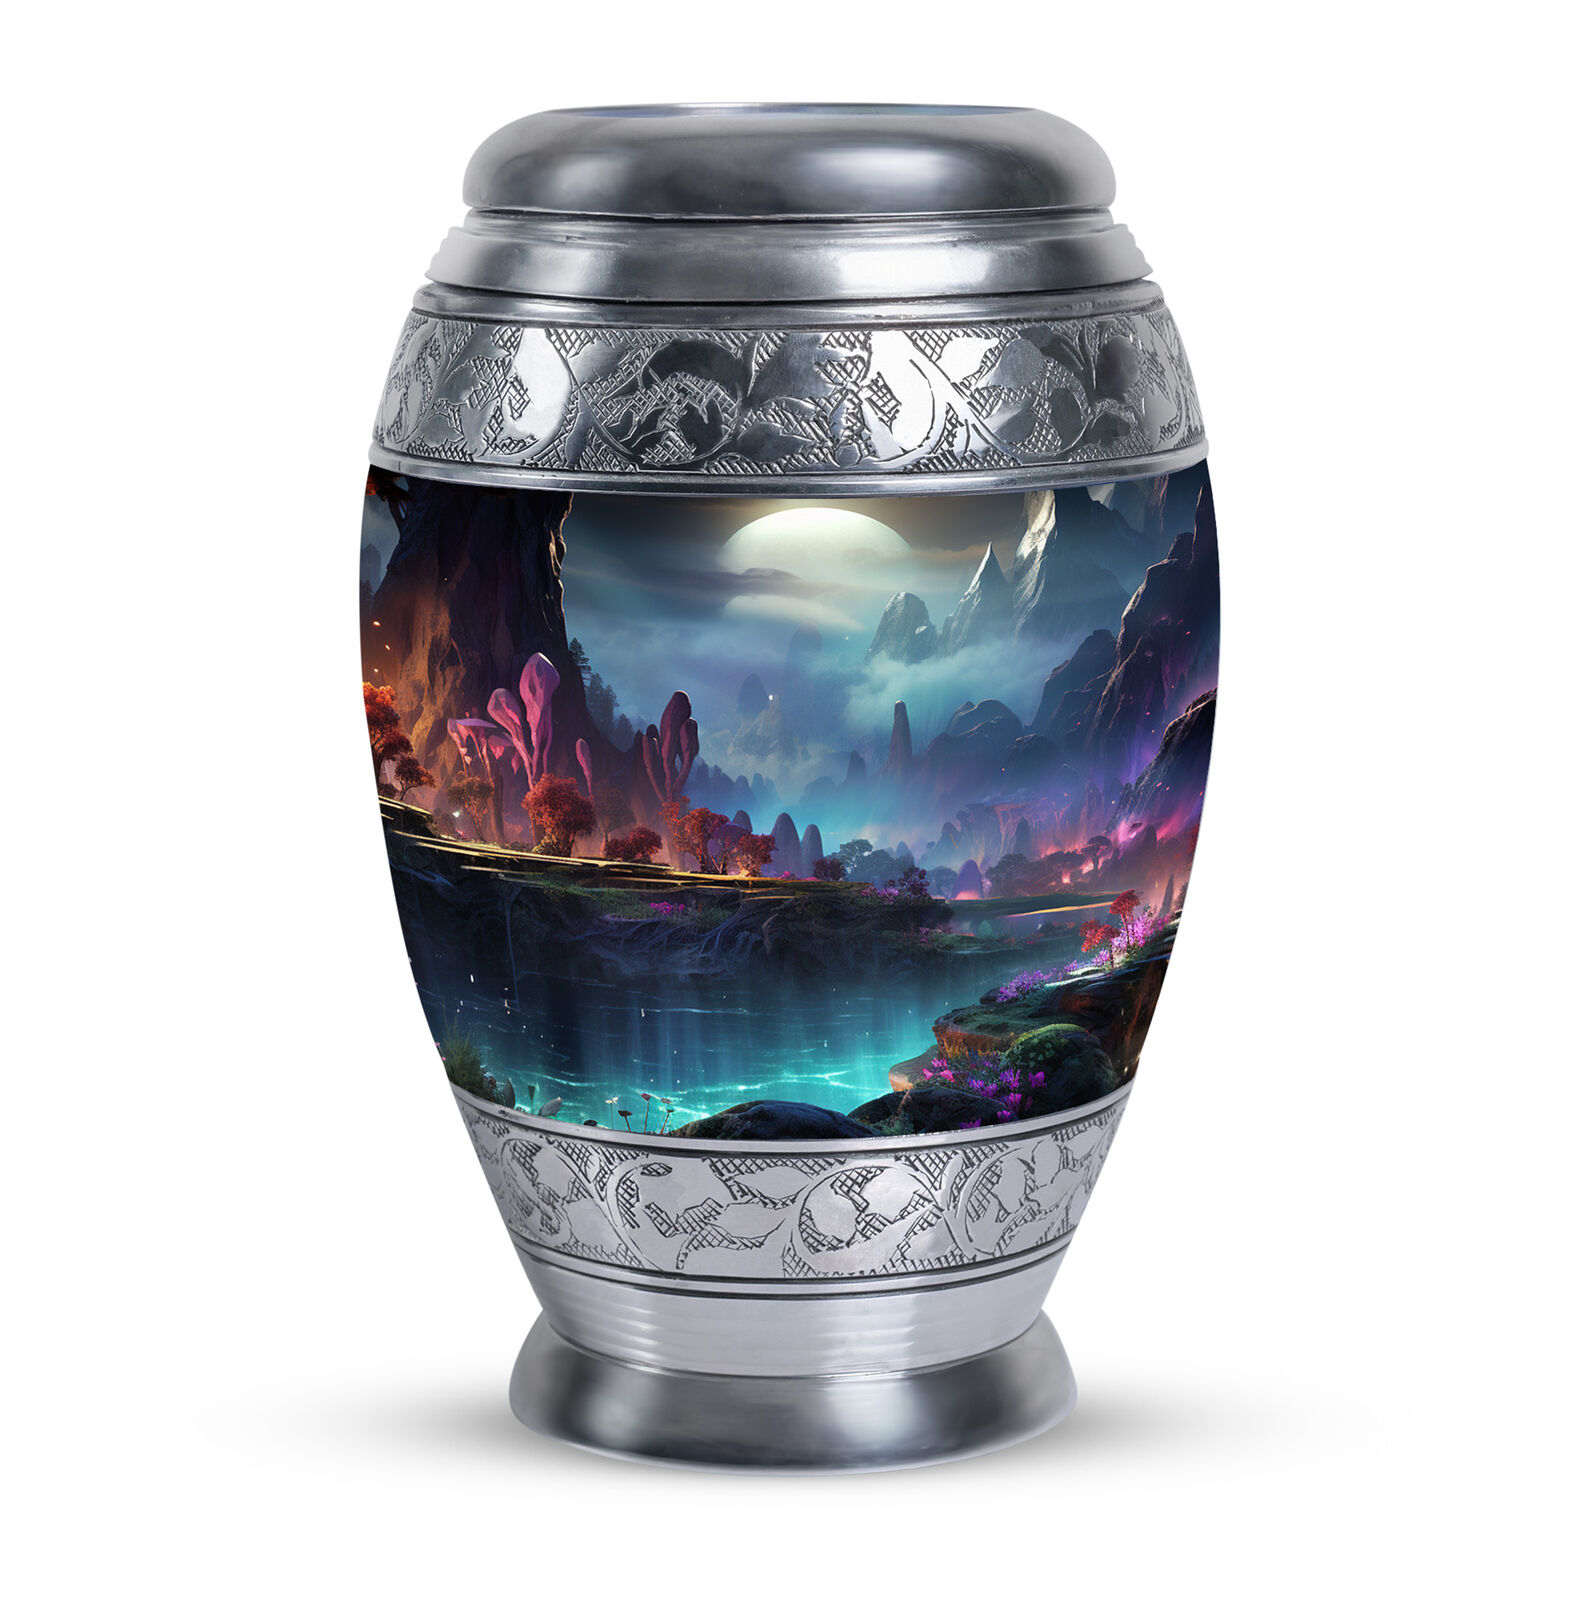 A Painting Of A Fantasy Forest With A River And A Full Moon (10 Inch) Large Urn